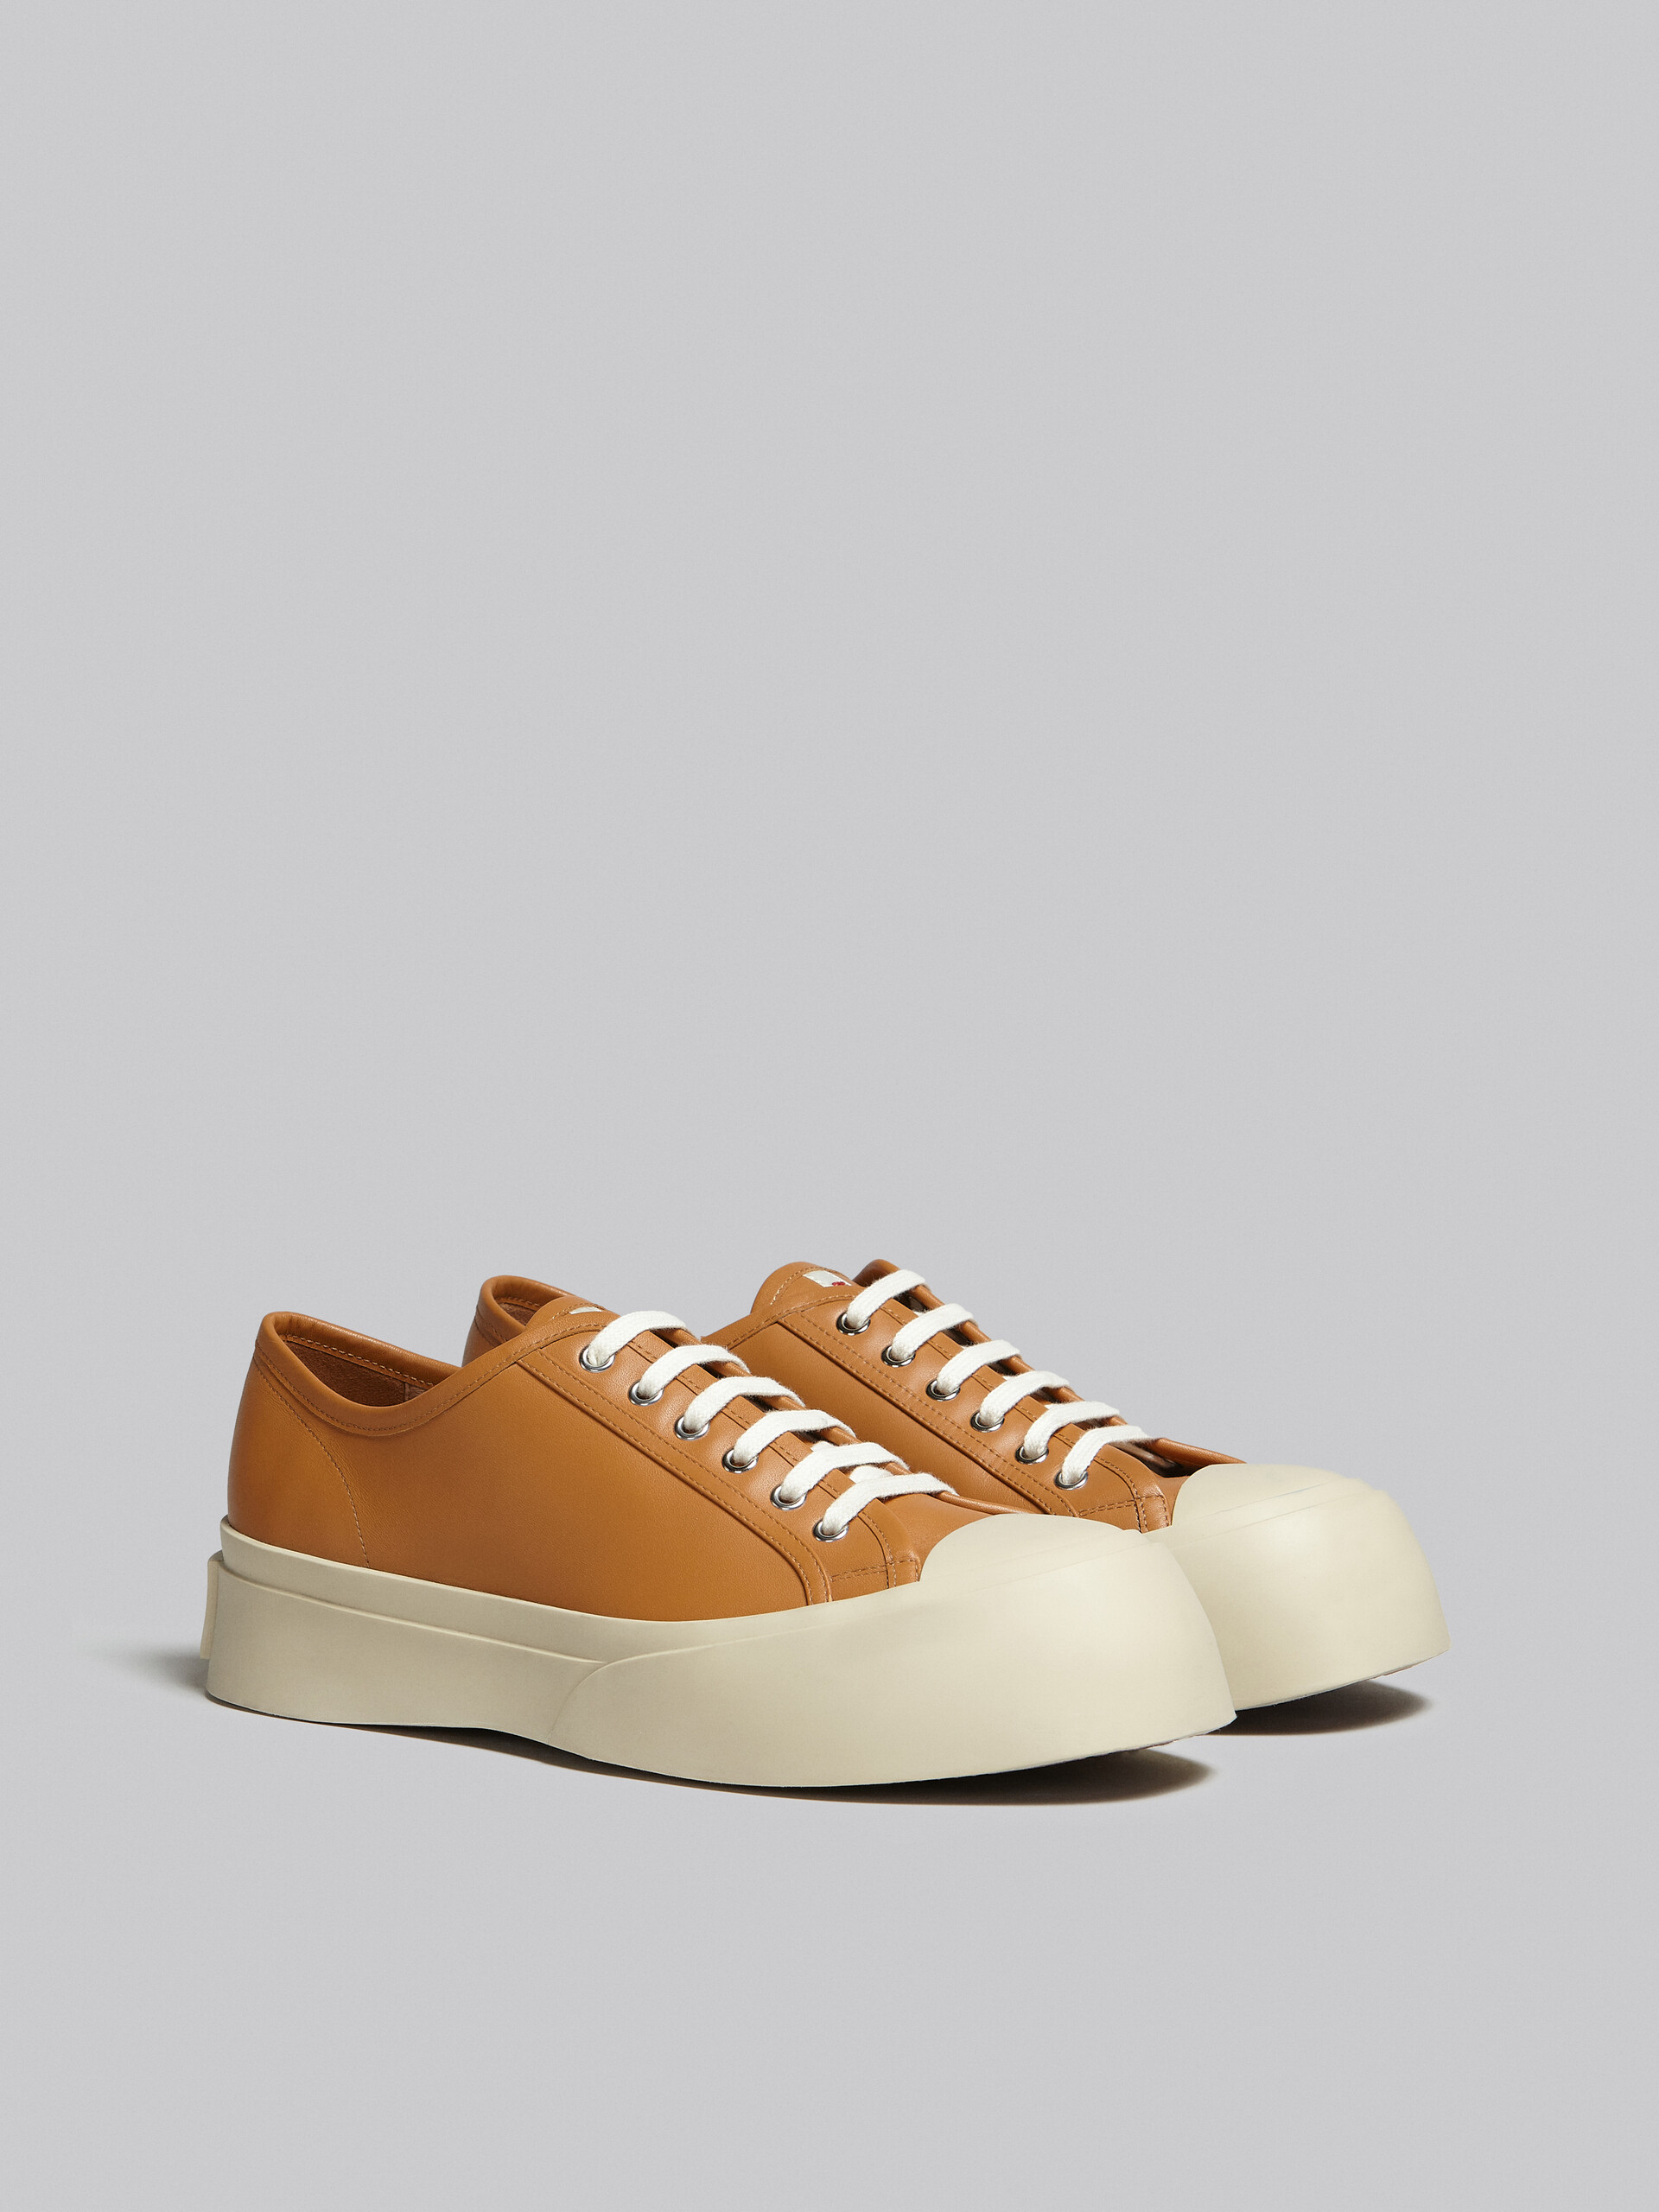 Brown nappa leather Pablo sneaker - Sneakers - Image 2